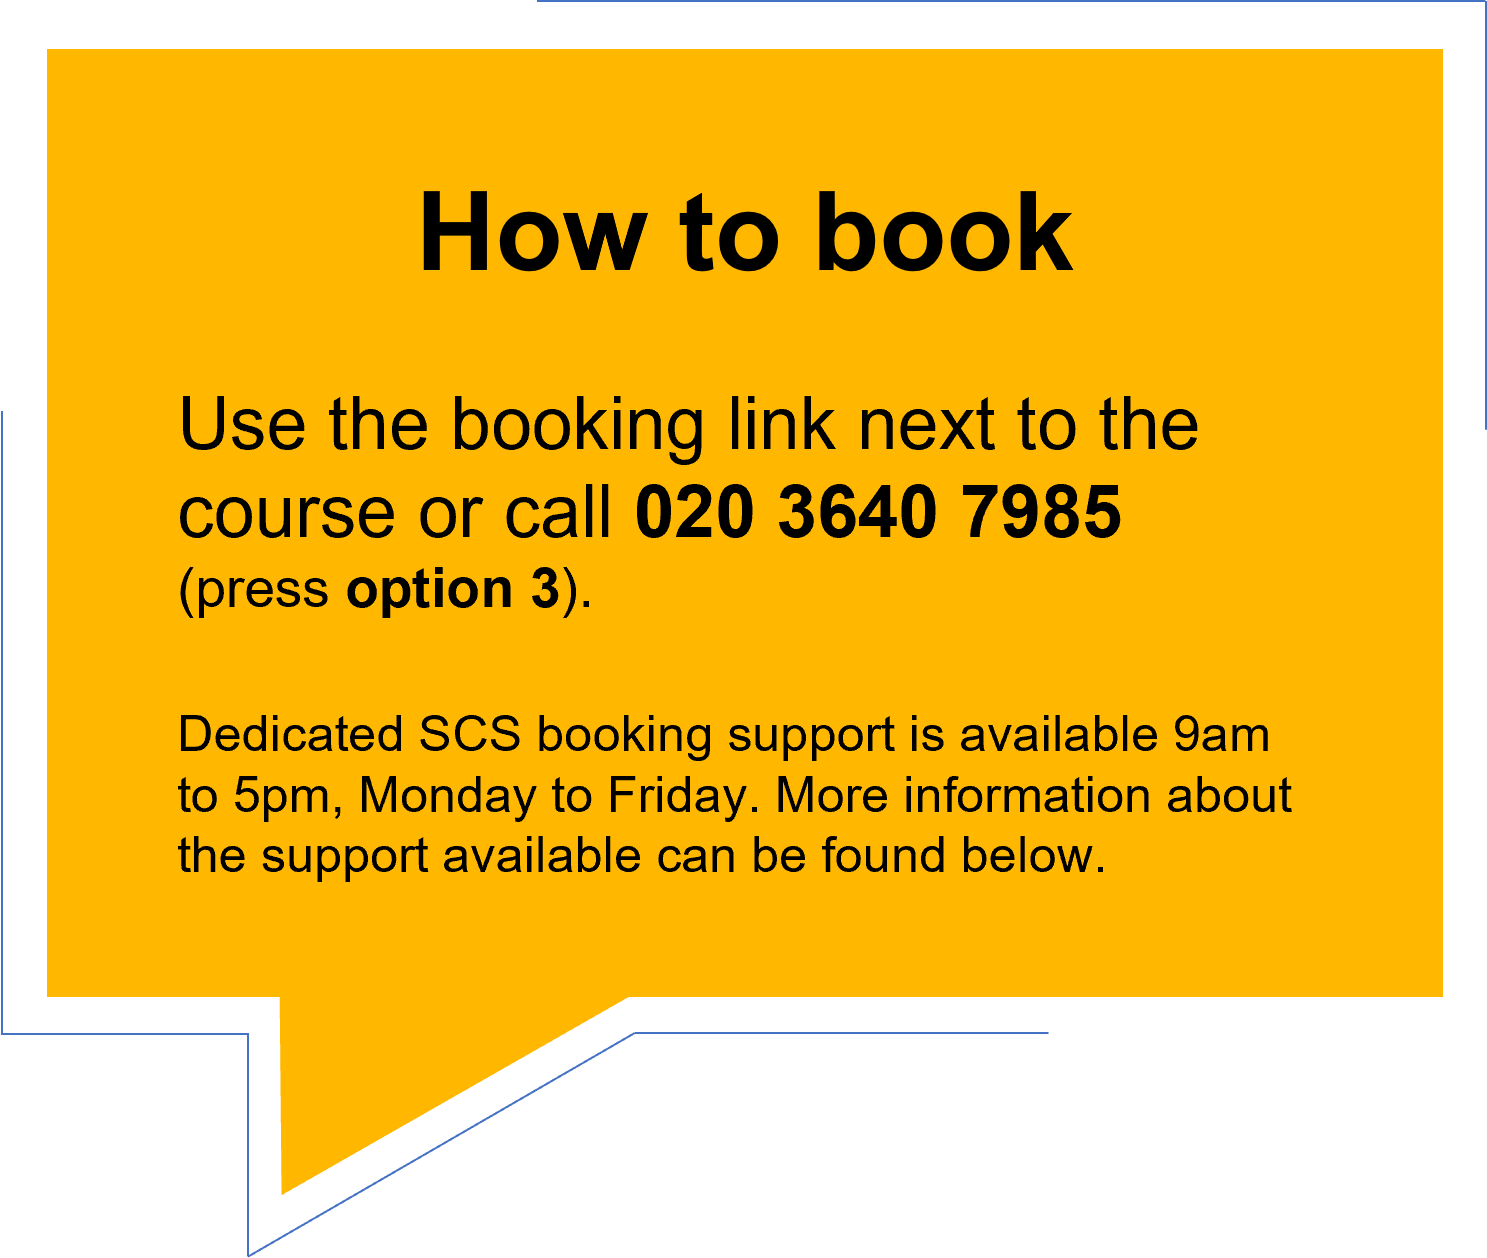 How to book. Use the booking link next to the course or call 020 3640 7985 (press option 3). Dedicated SCS booking support is available 9am to 5pm, Monday to Friday. More information about the support available can be found below.